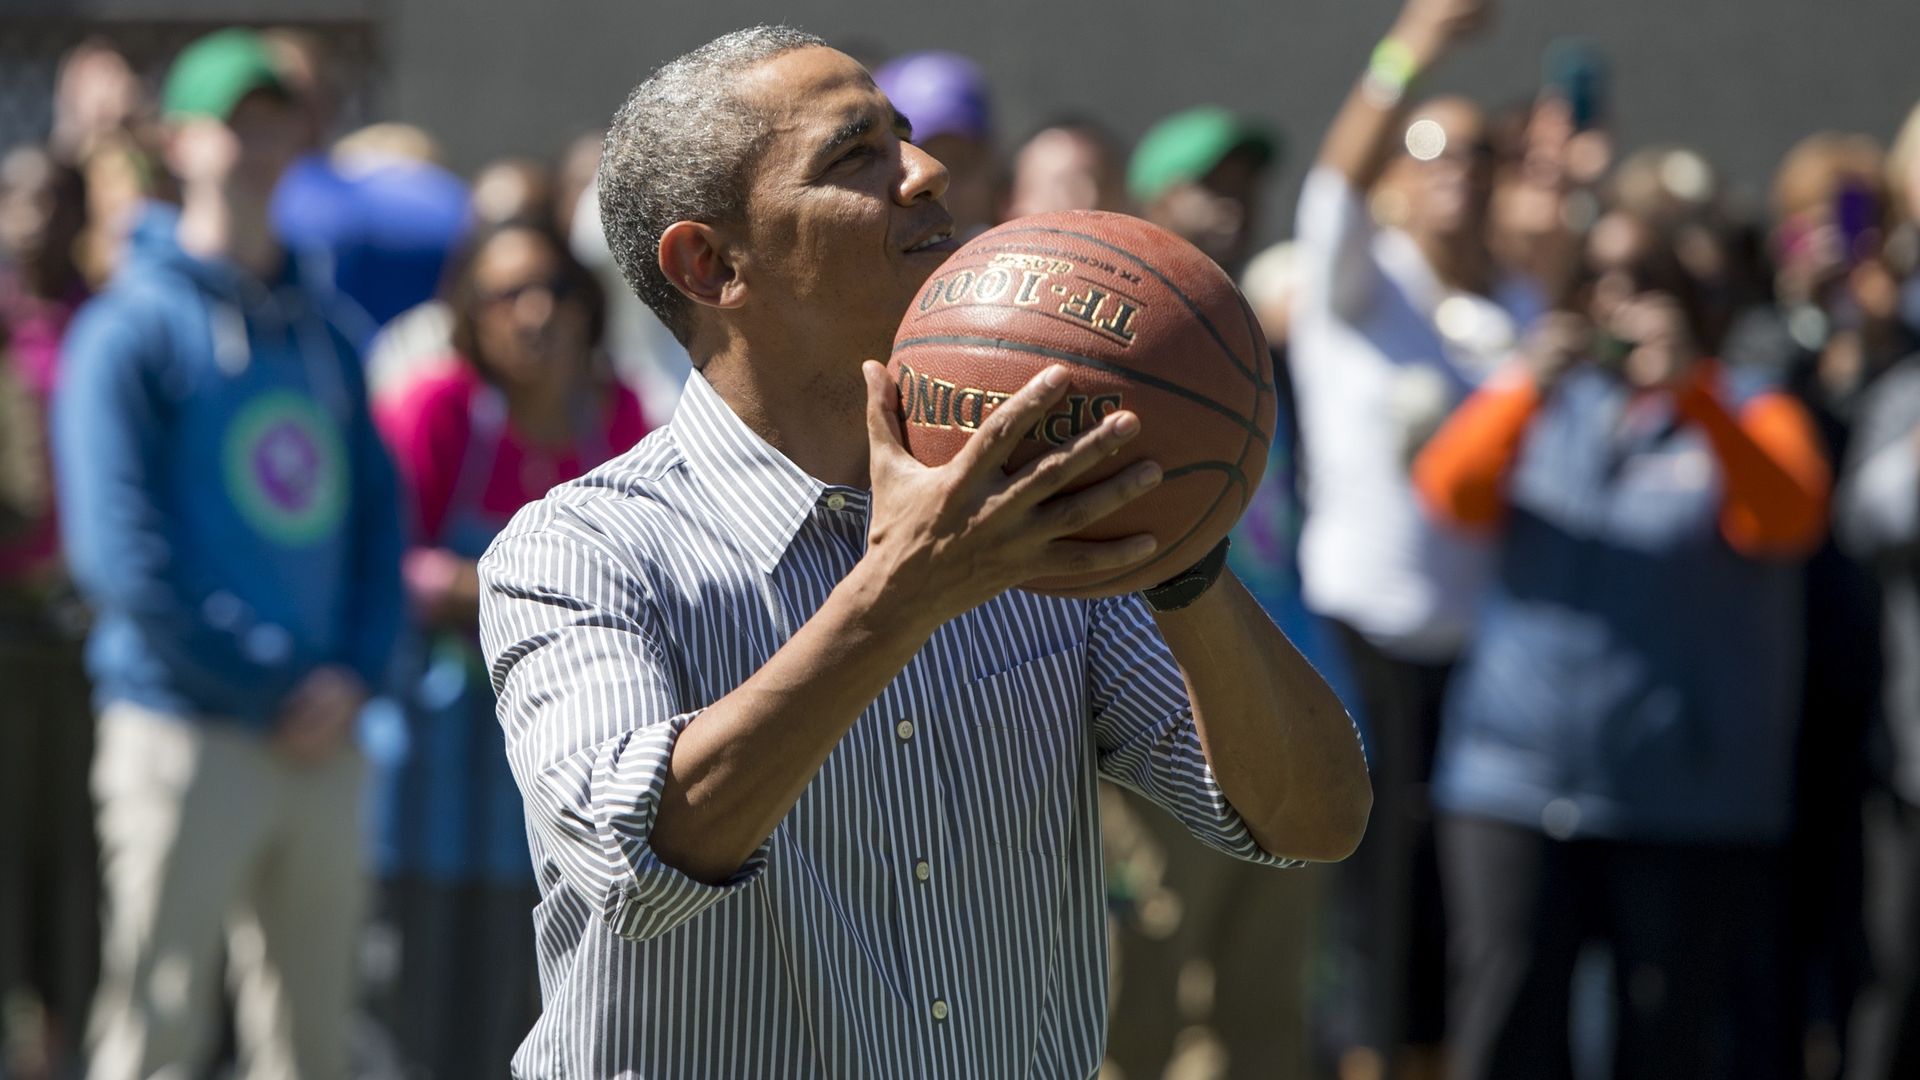 Obama shoots a basketball during the annual White House Easter Egg Roll on the South Lawn of the White House in Washington, DC, April 21, 2014. 